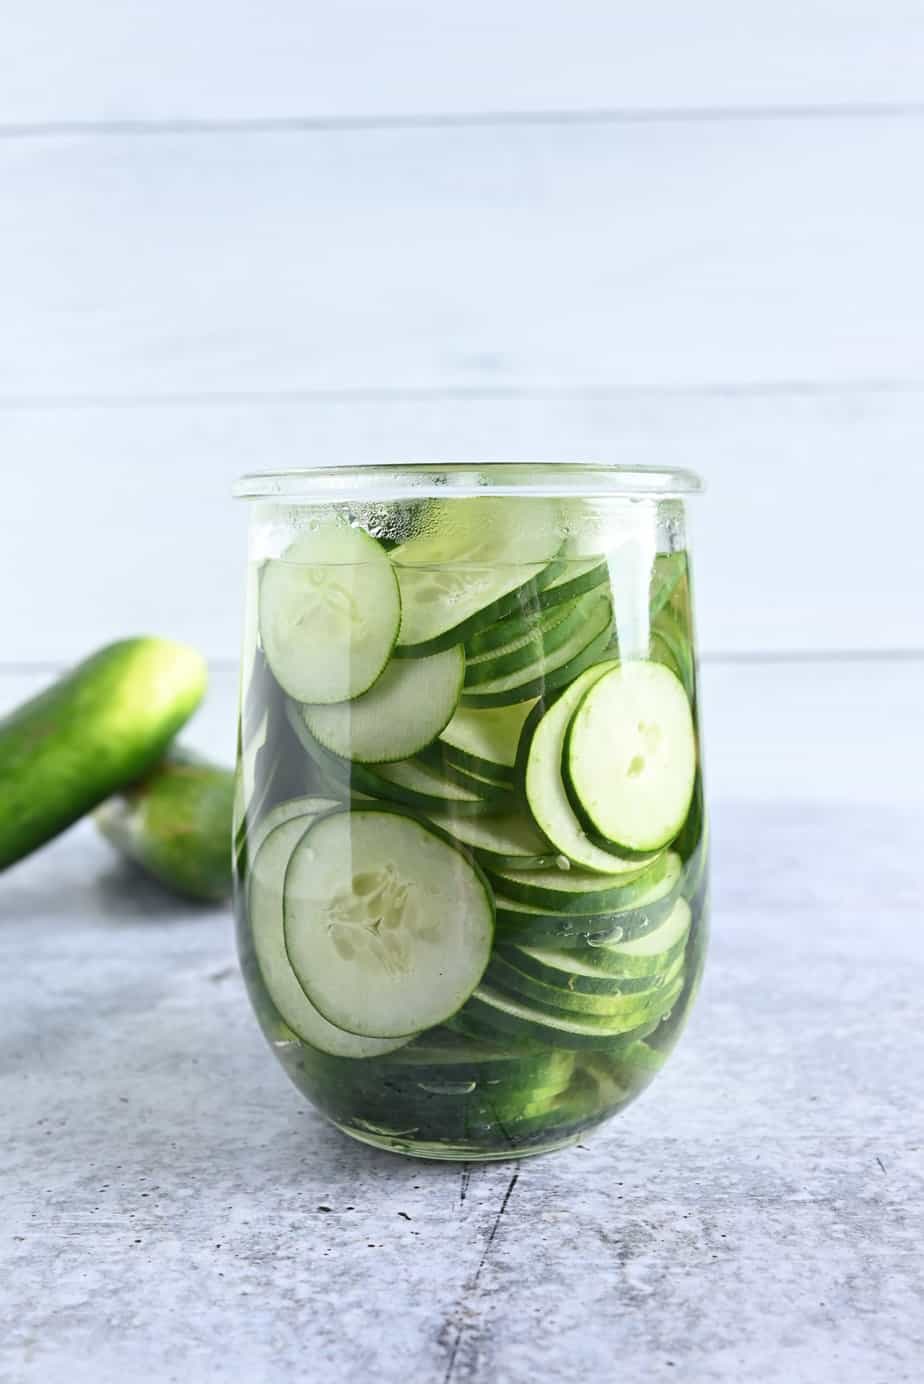 Sliced cucumbers covered with pickle brine in an open glass jar.